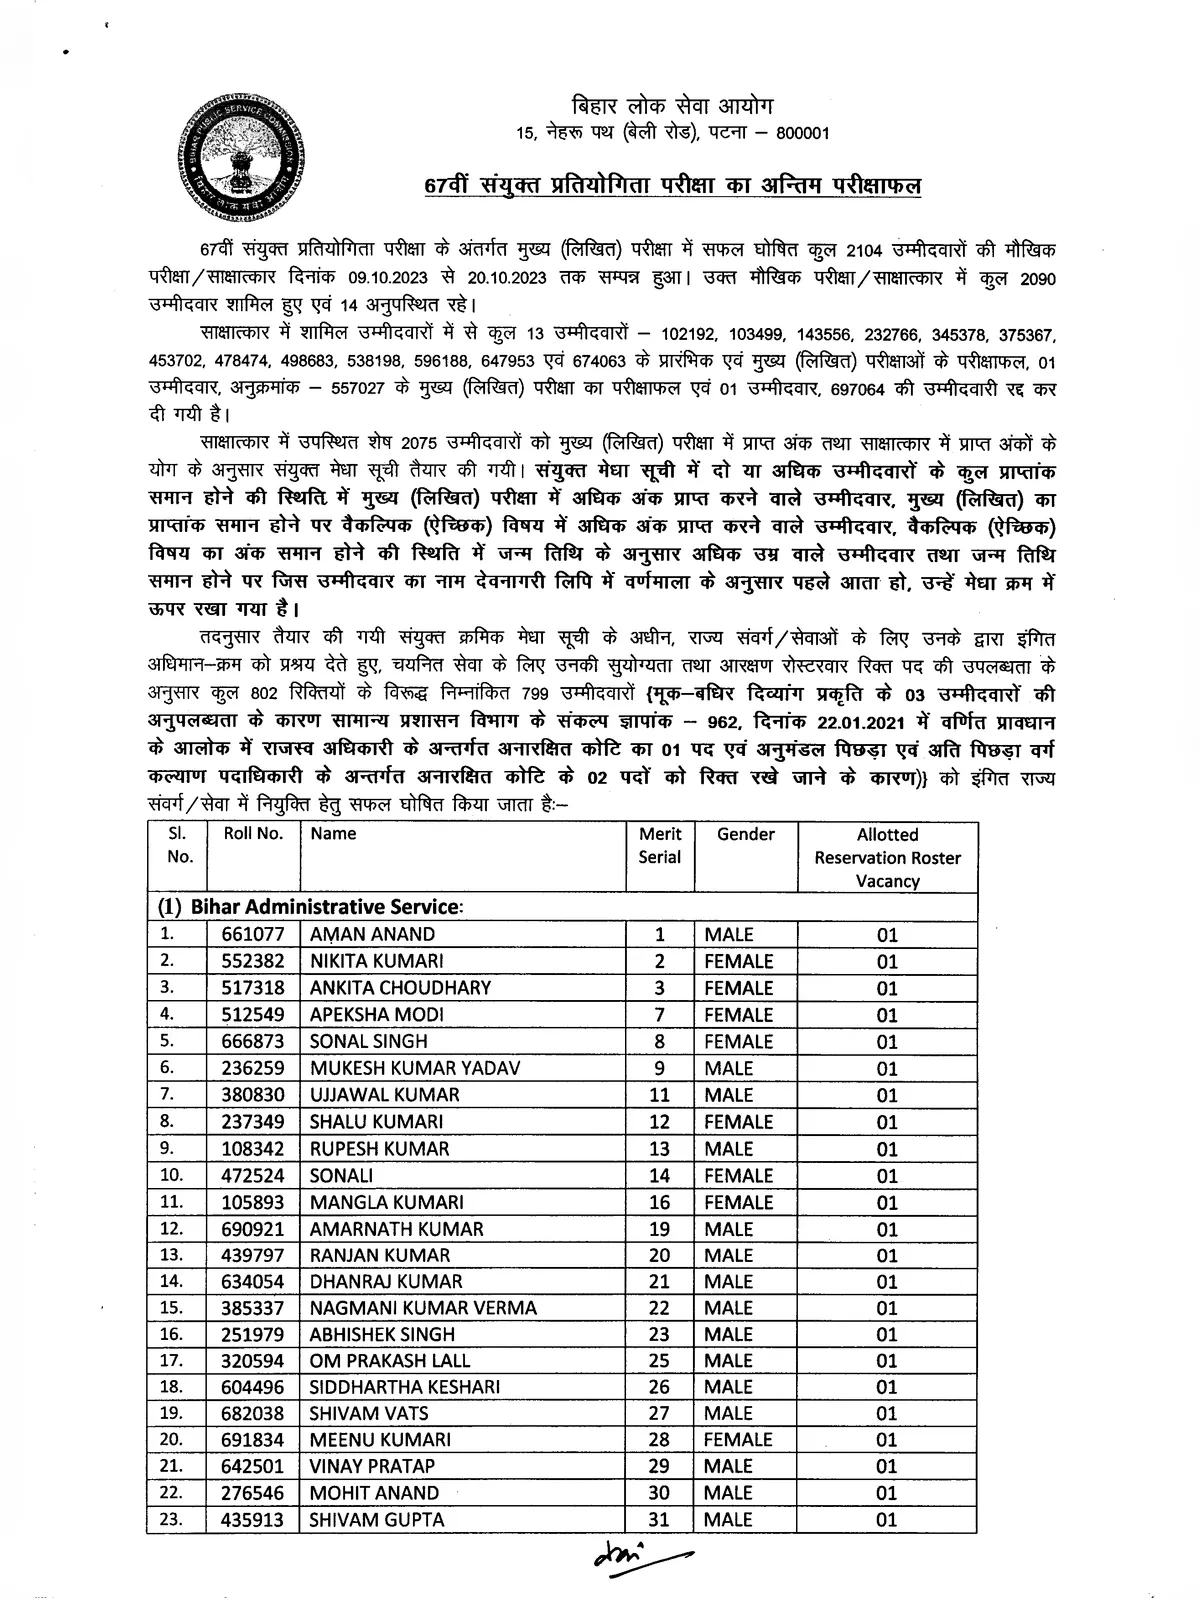 BPSC 67th Mains Result